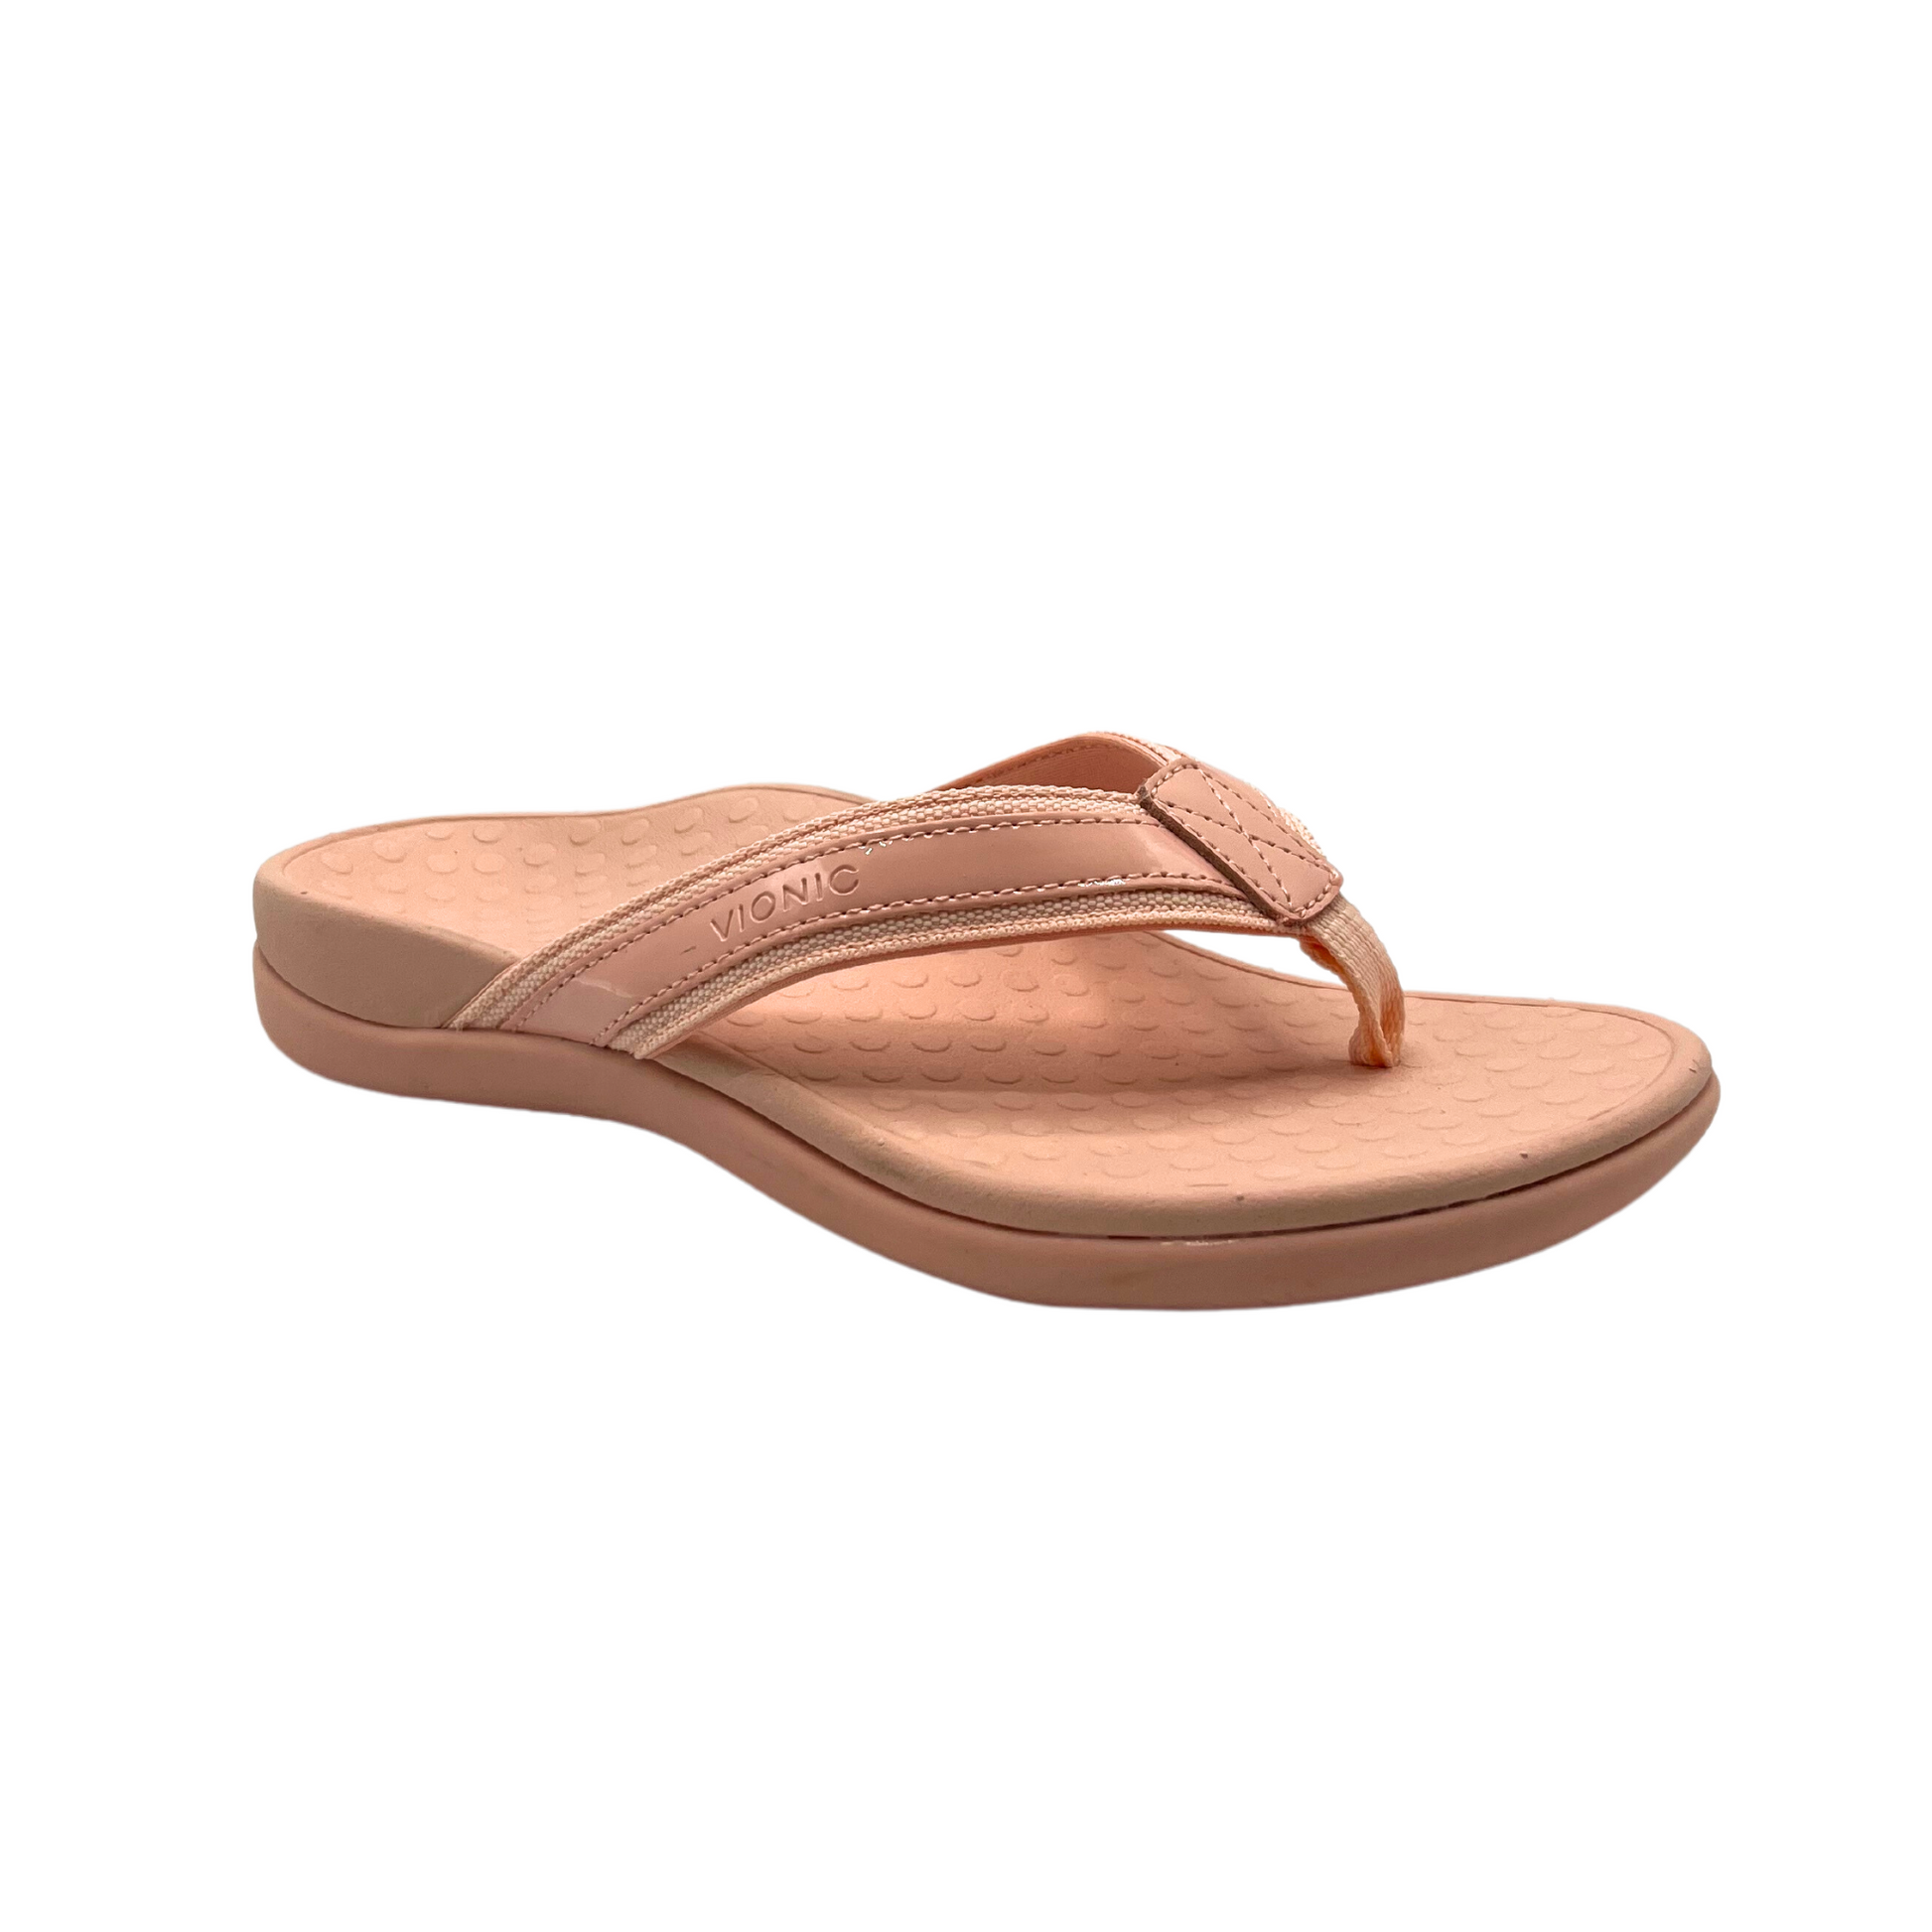 Angled front view of a flip flop sandal in a roze color.  